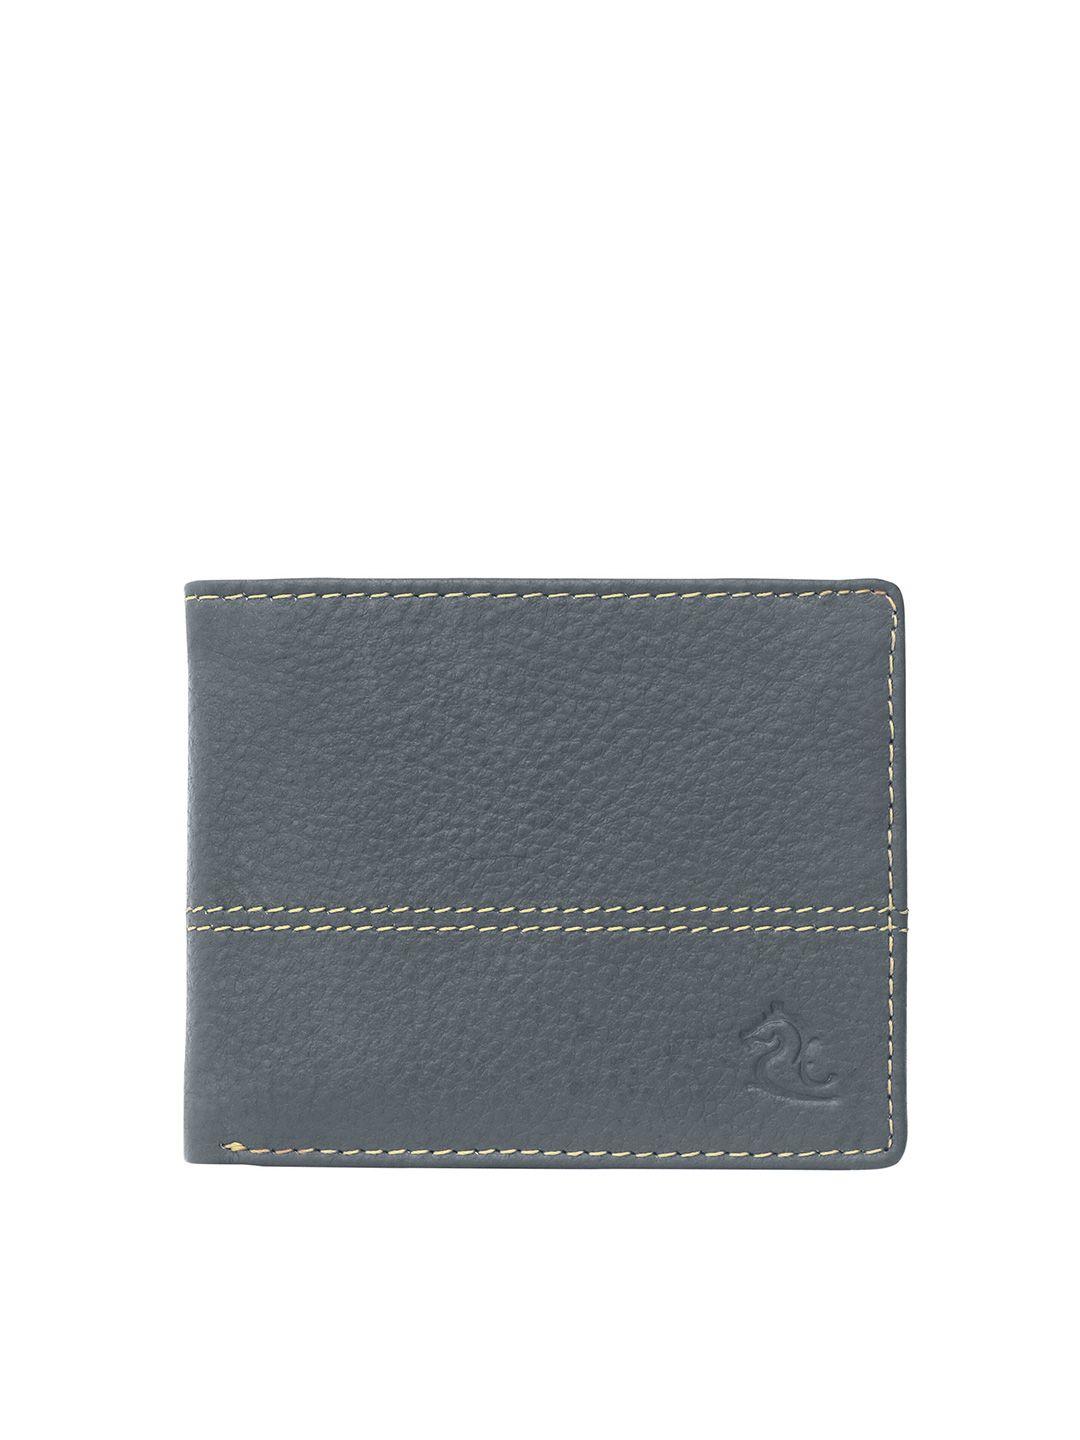 kara men two fold wallet with contrast stitch and 7 cards slots